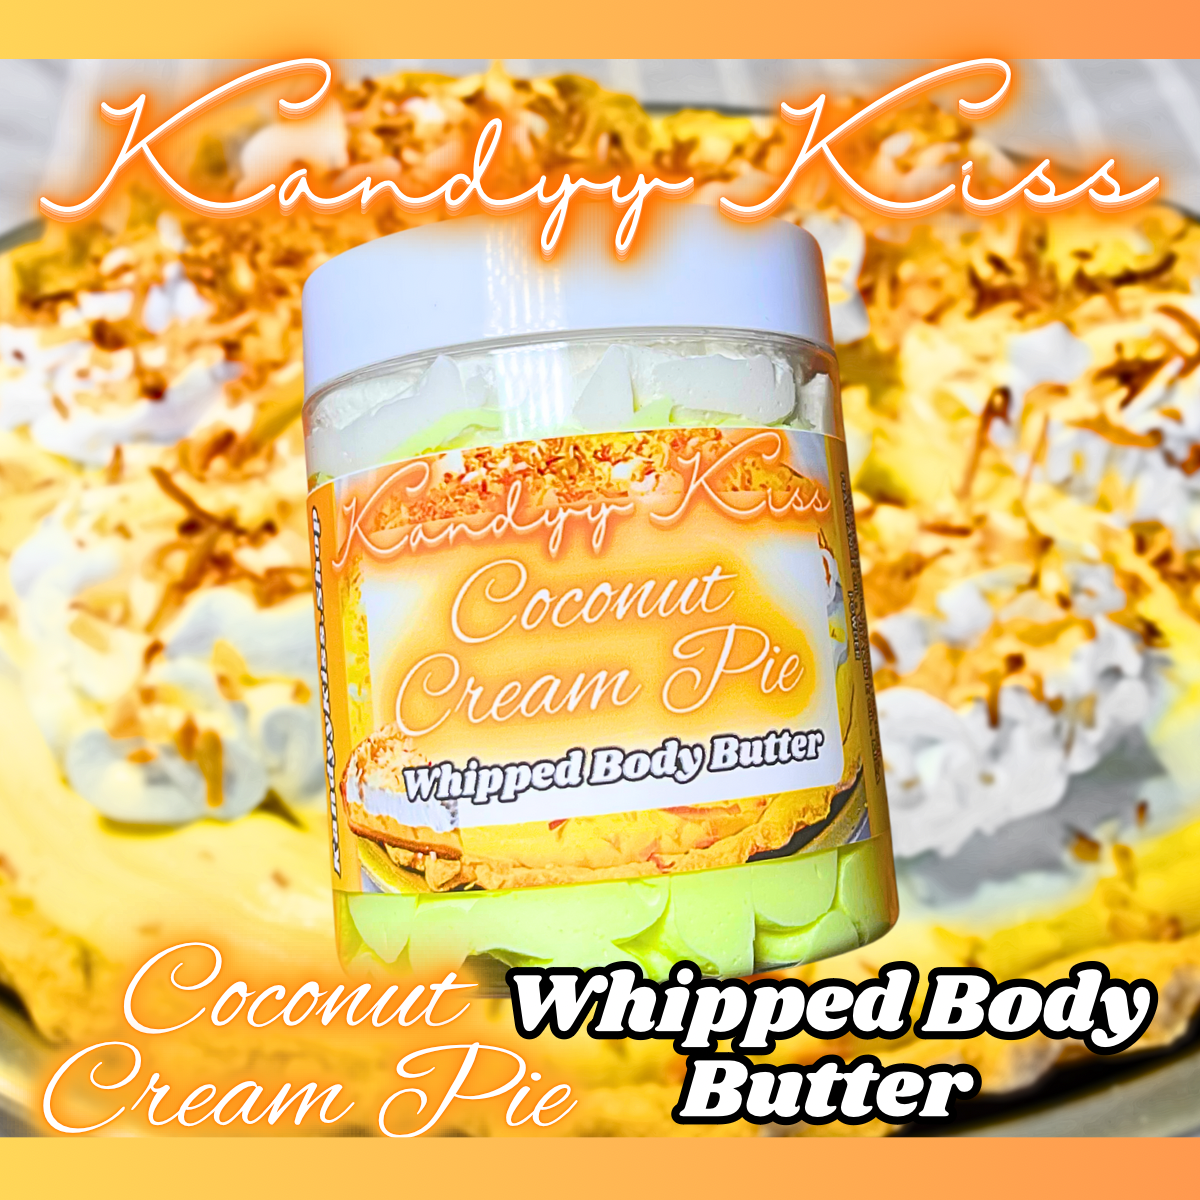 Coconut Cream Pie Whipped Body Butter